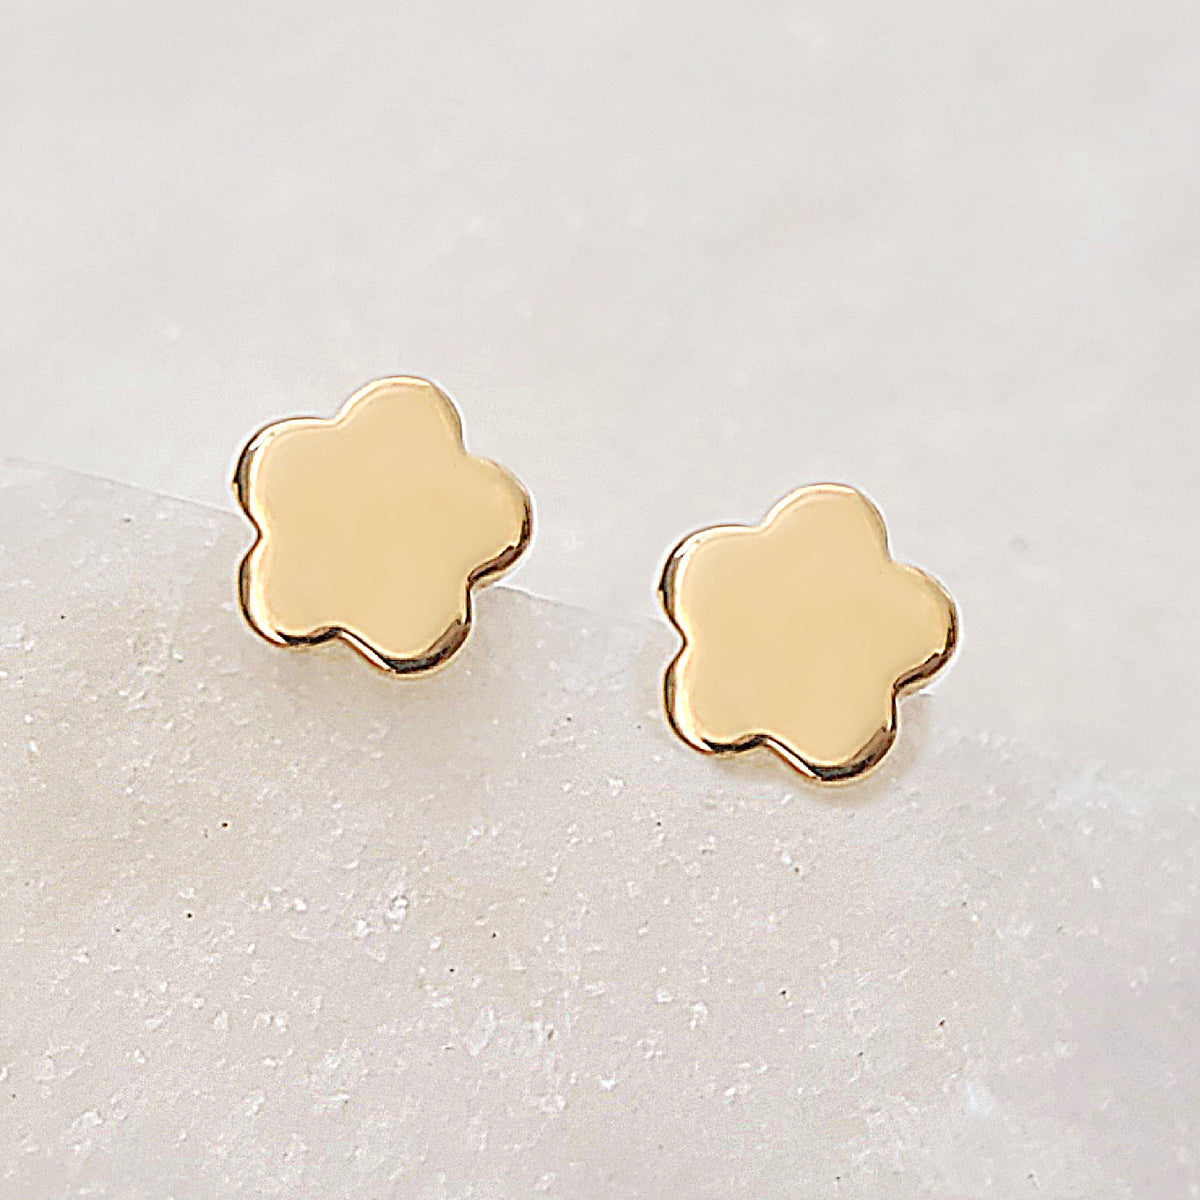 Sincerely Ginger Jewelry 14K Minimalistic Daisy Earrings in Yellow Gold